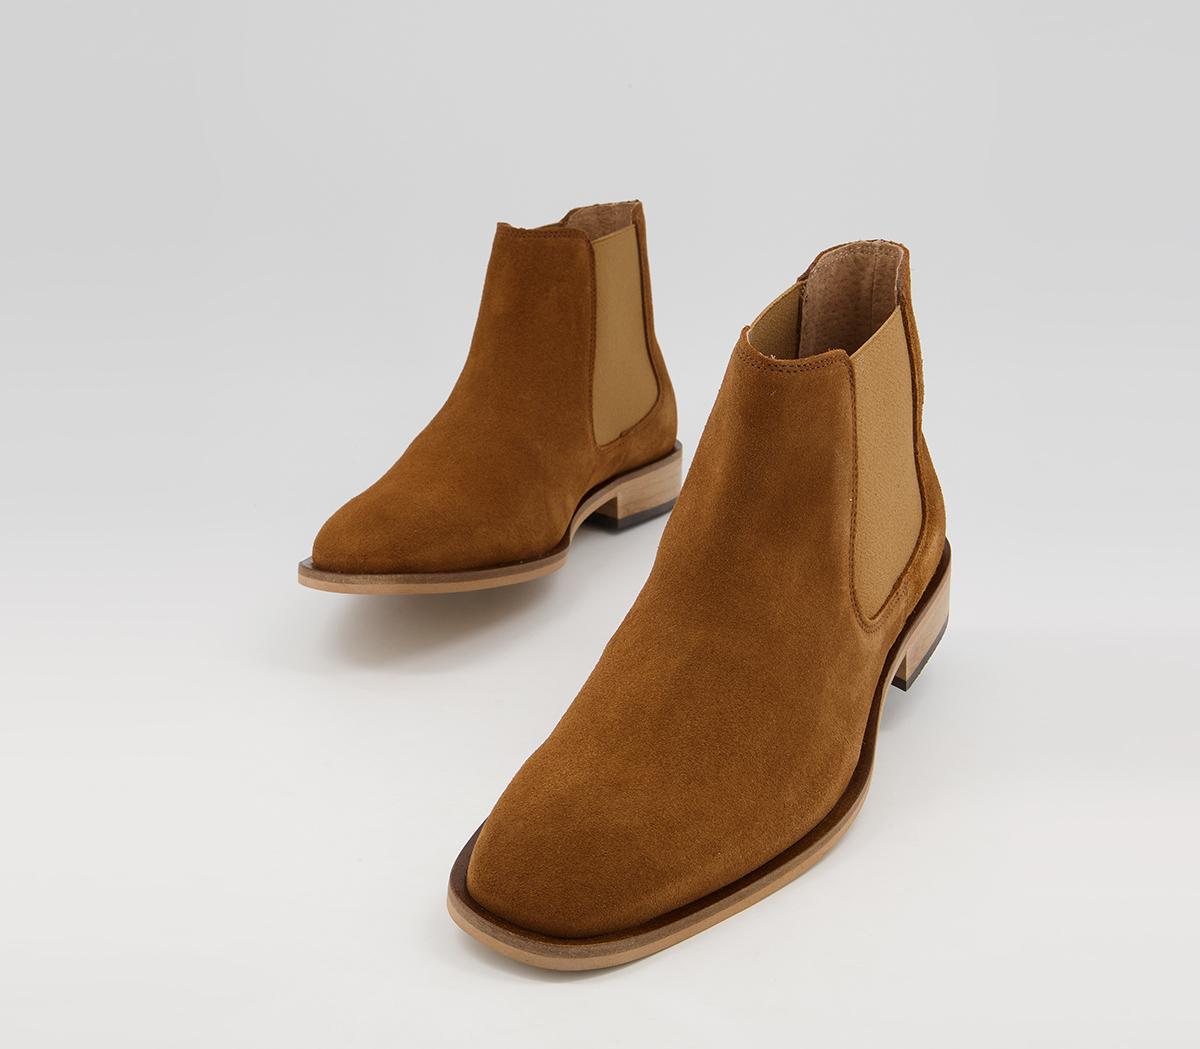 OFFICE Bravo Chelsea Boots Tan Suede - Men's Casual Shoes